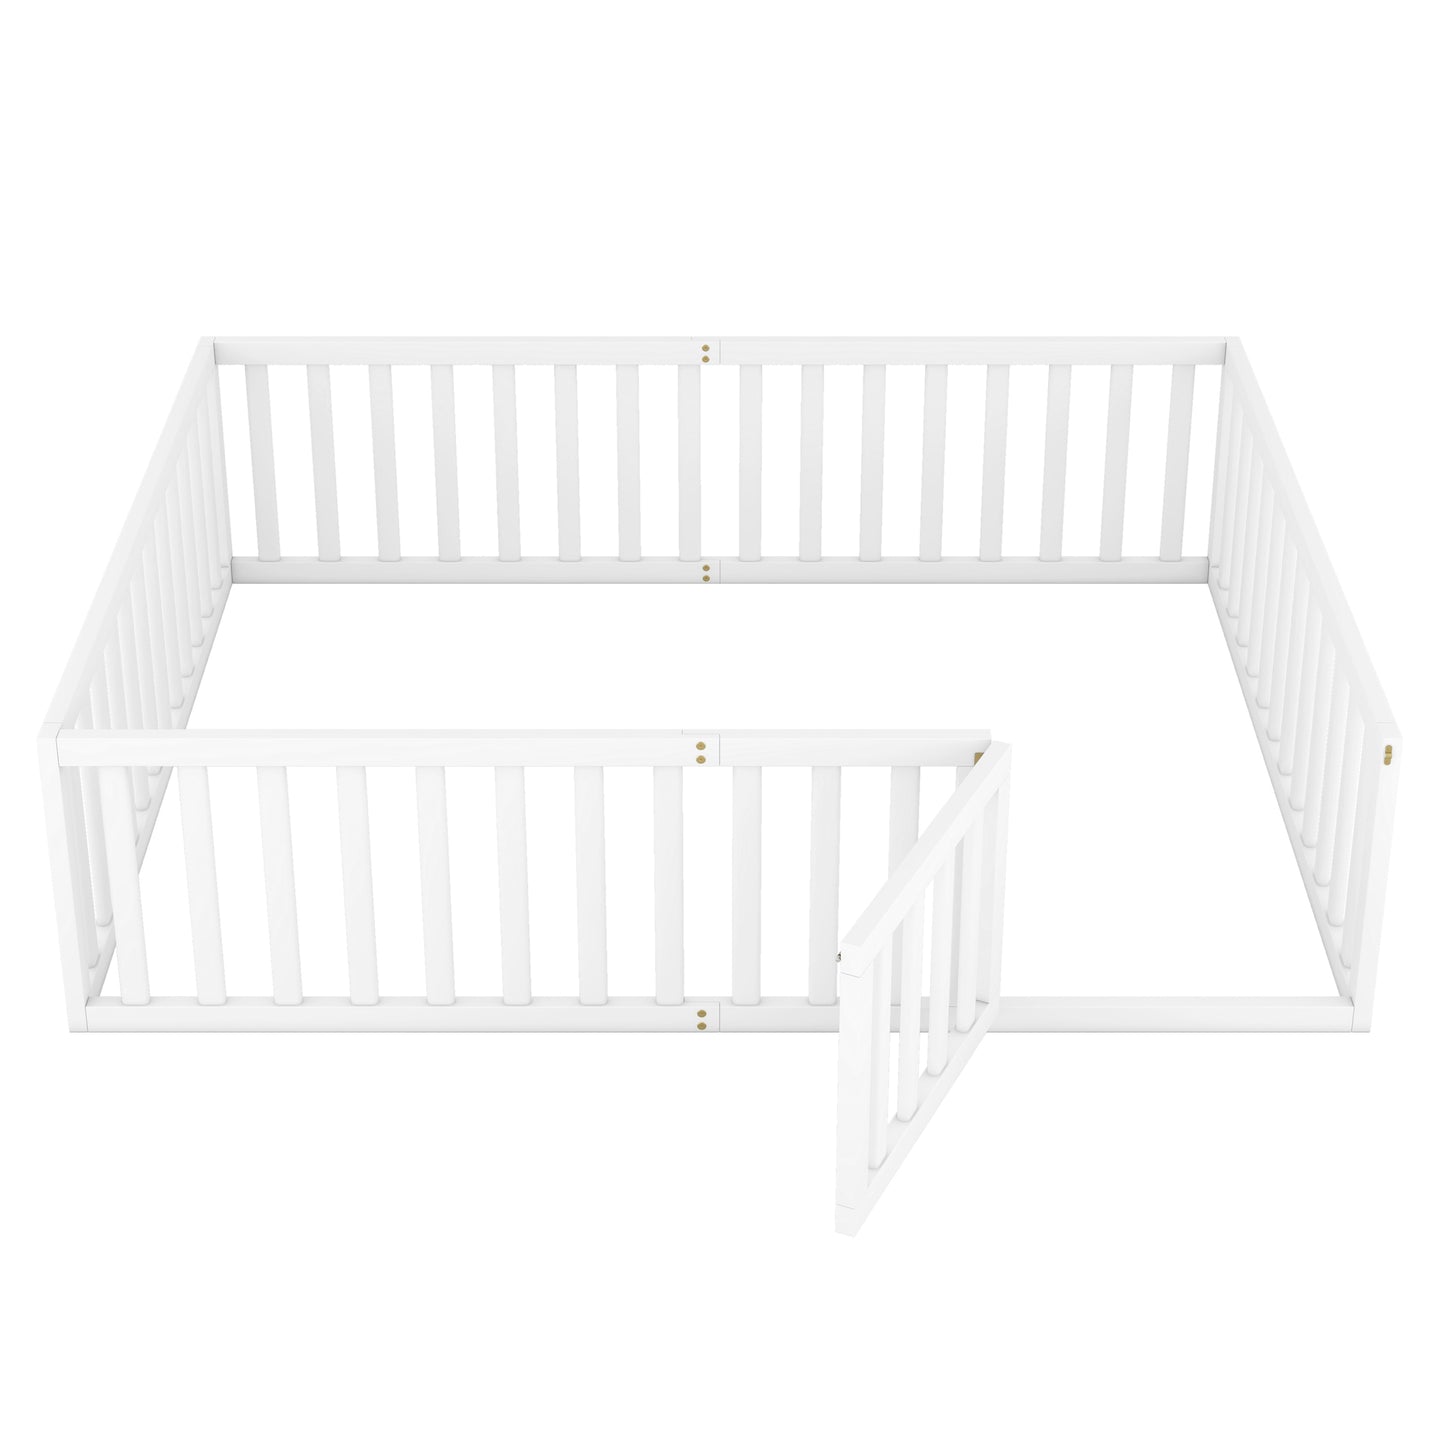 Queen Size Wood Floor Platform Bed Frame with Fence and Door, White